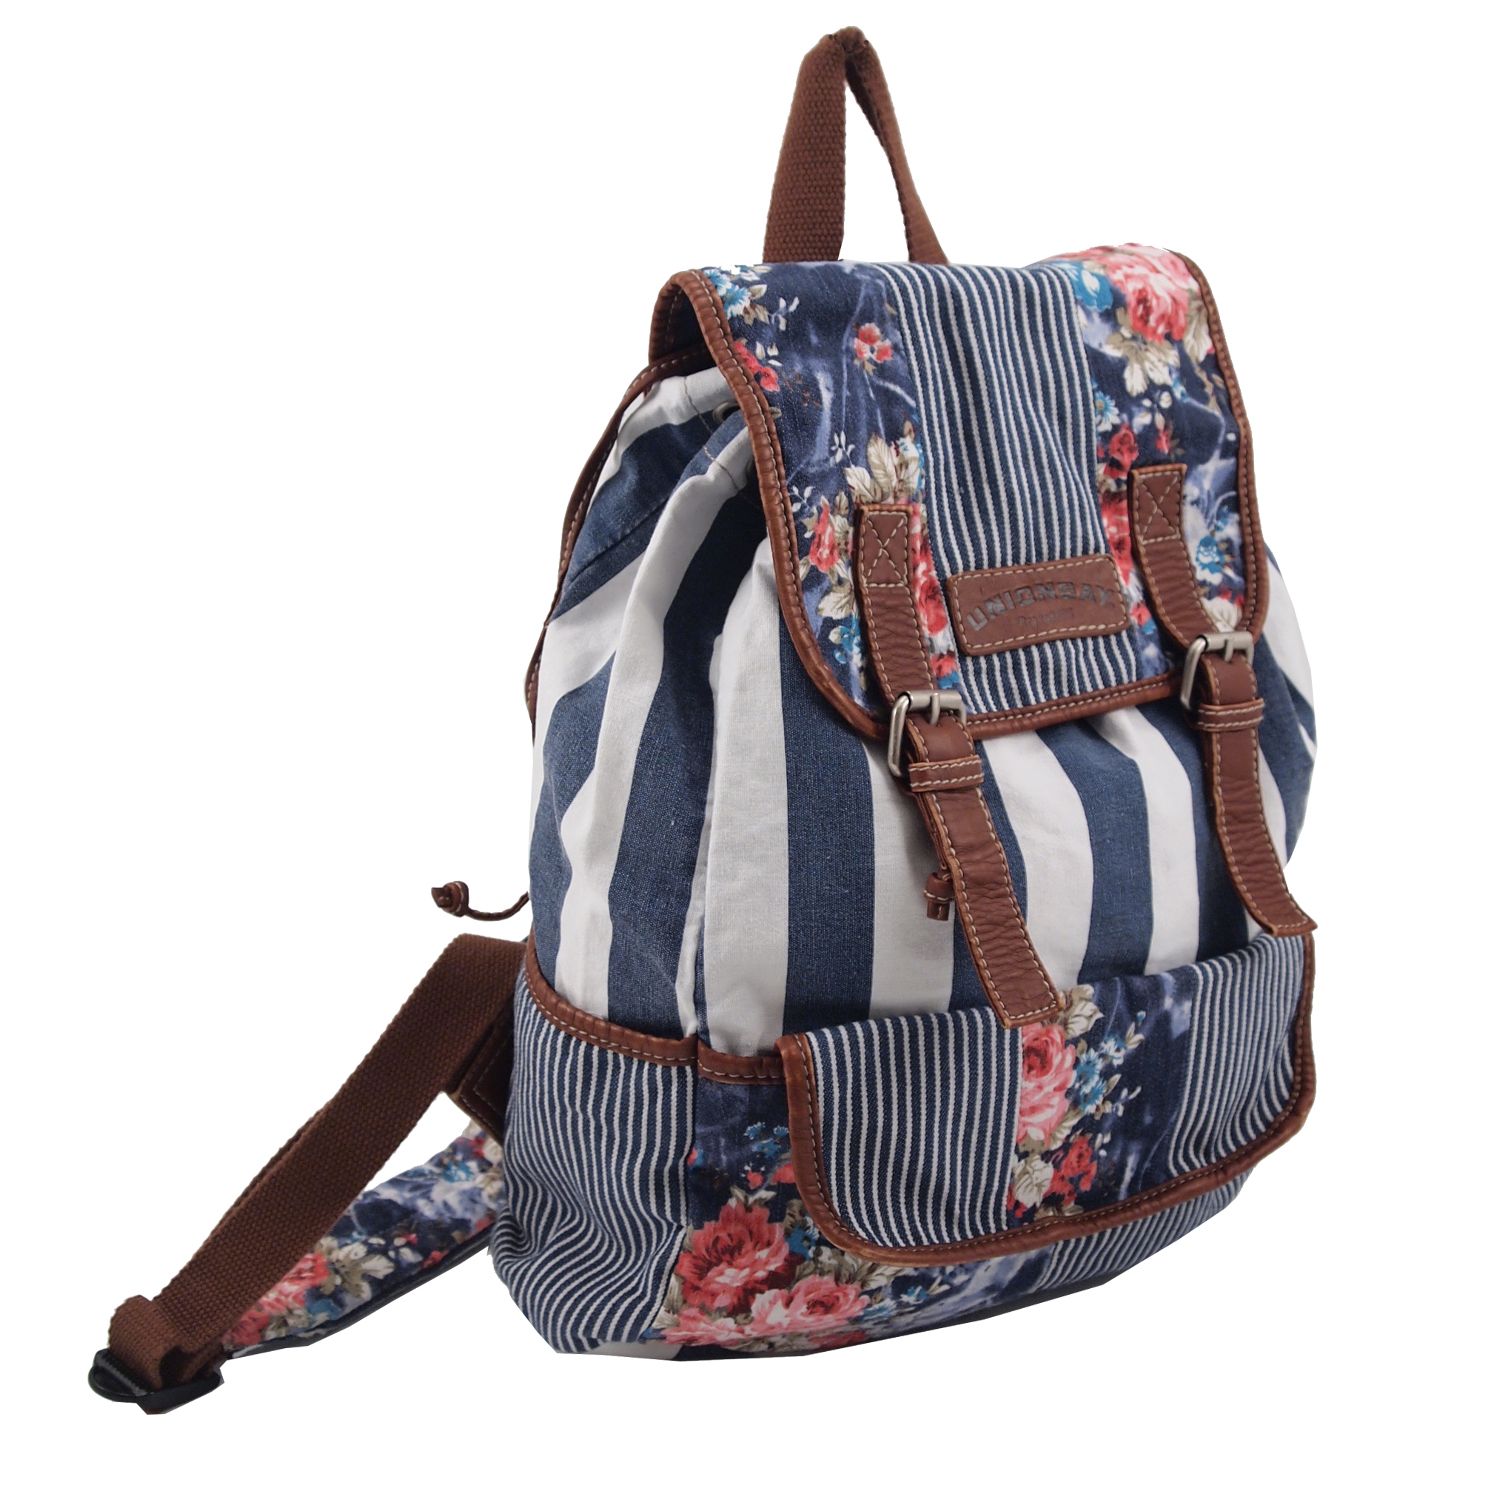 Unionbay Women's Backpack - Floral & Striped